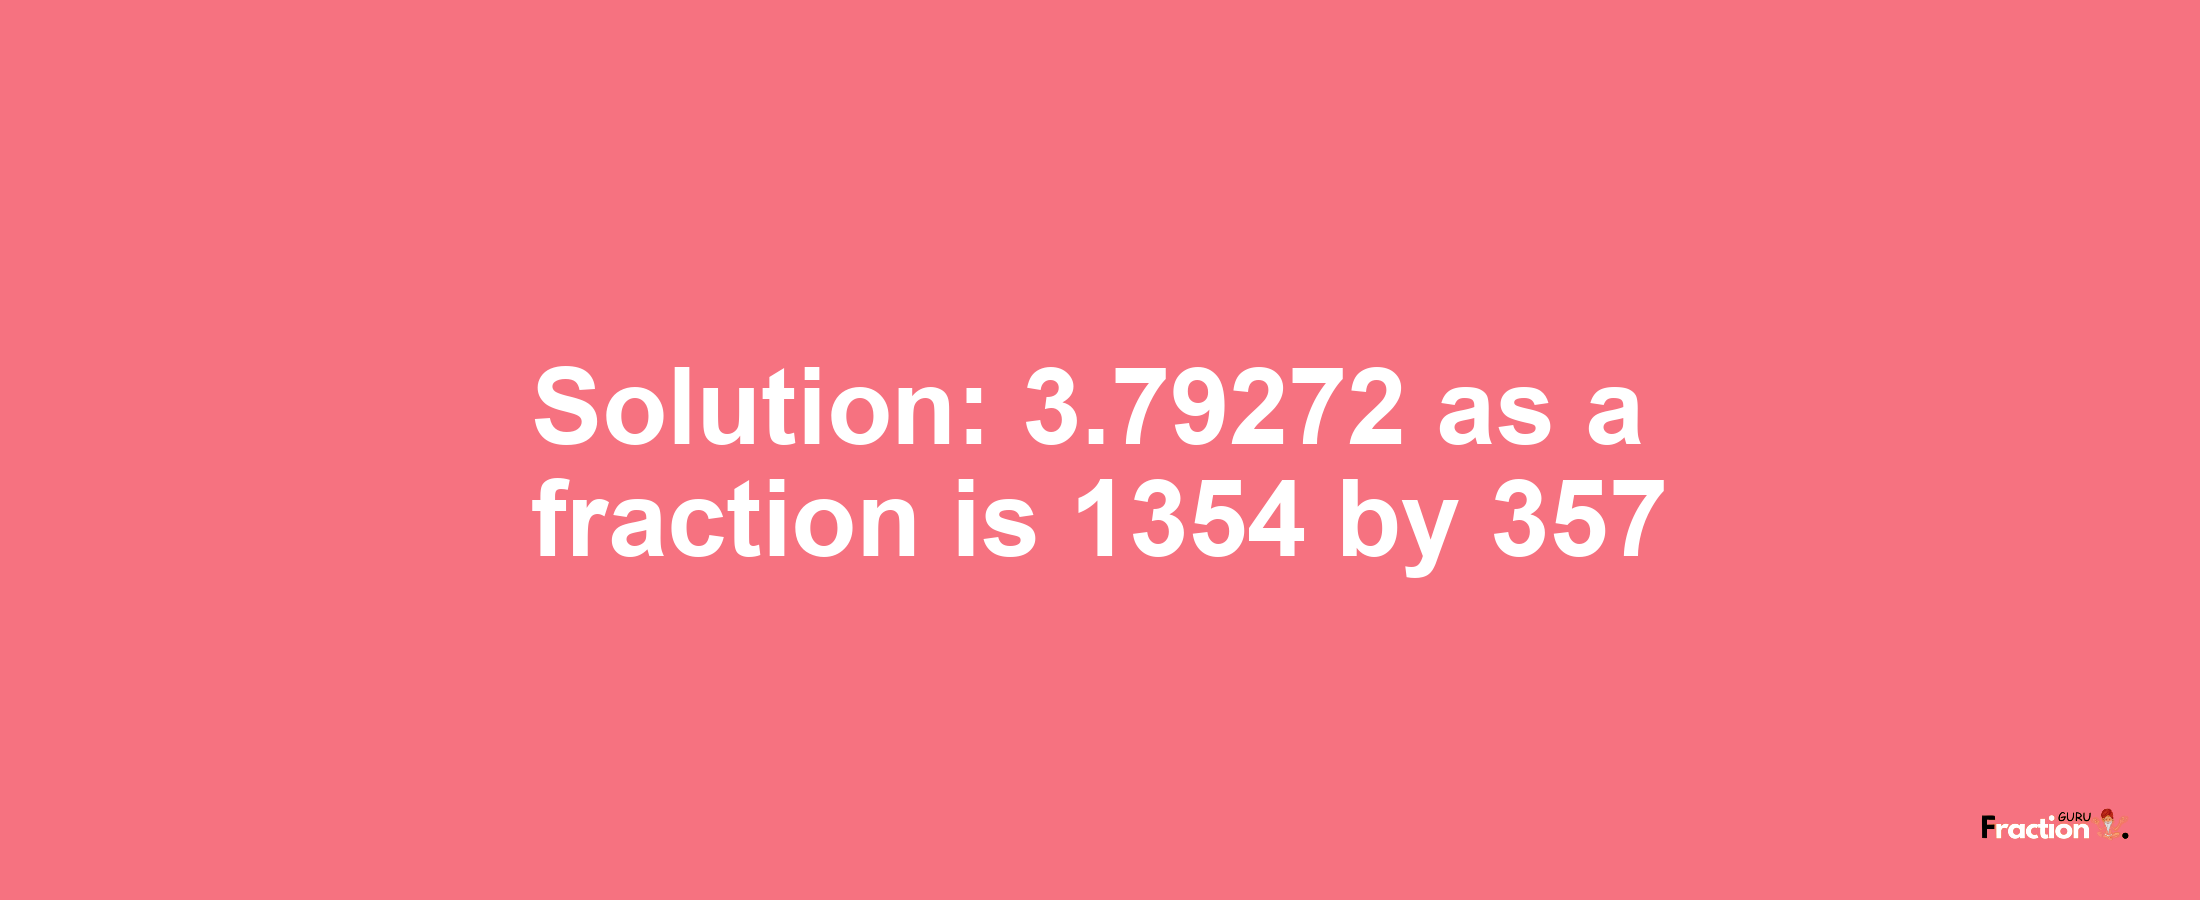 Solution:3.79272 as a fraction is 1354/357